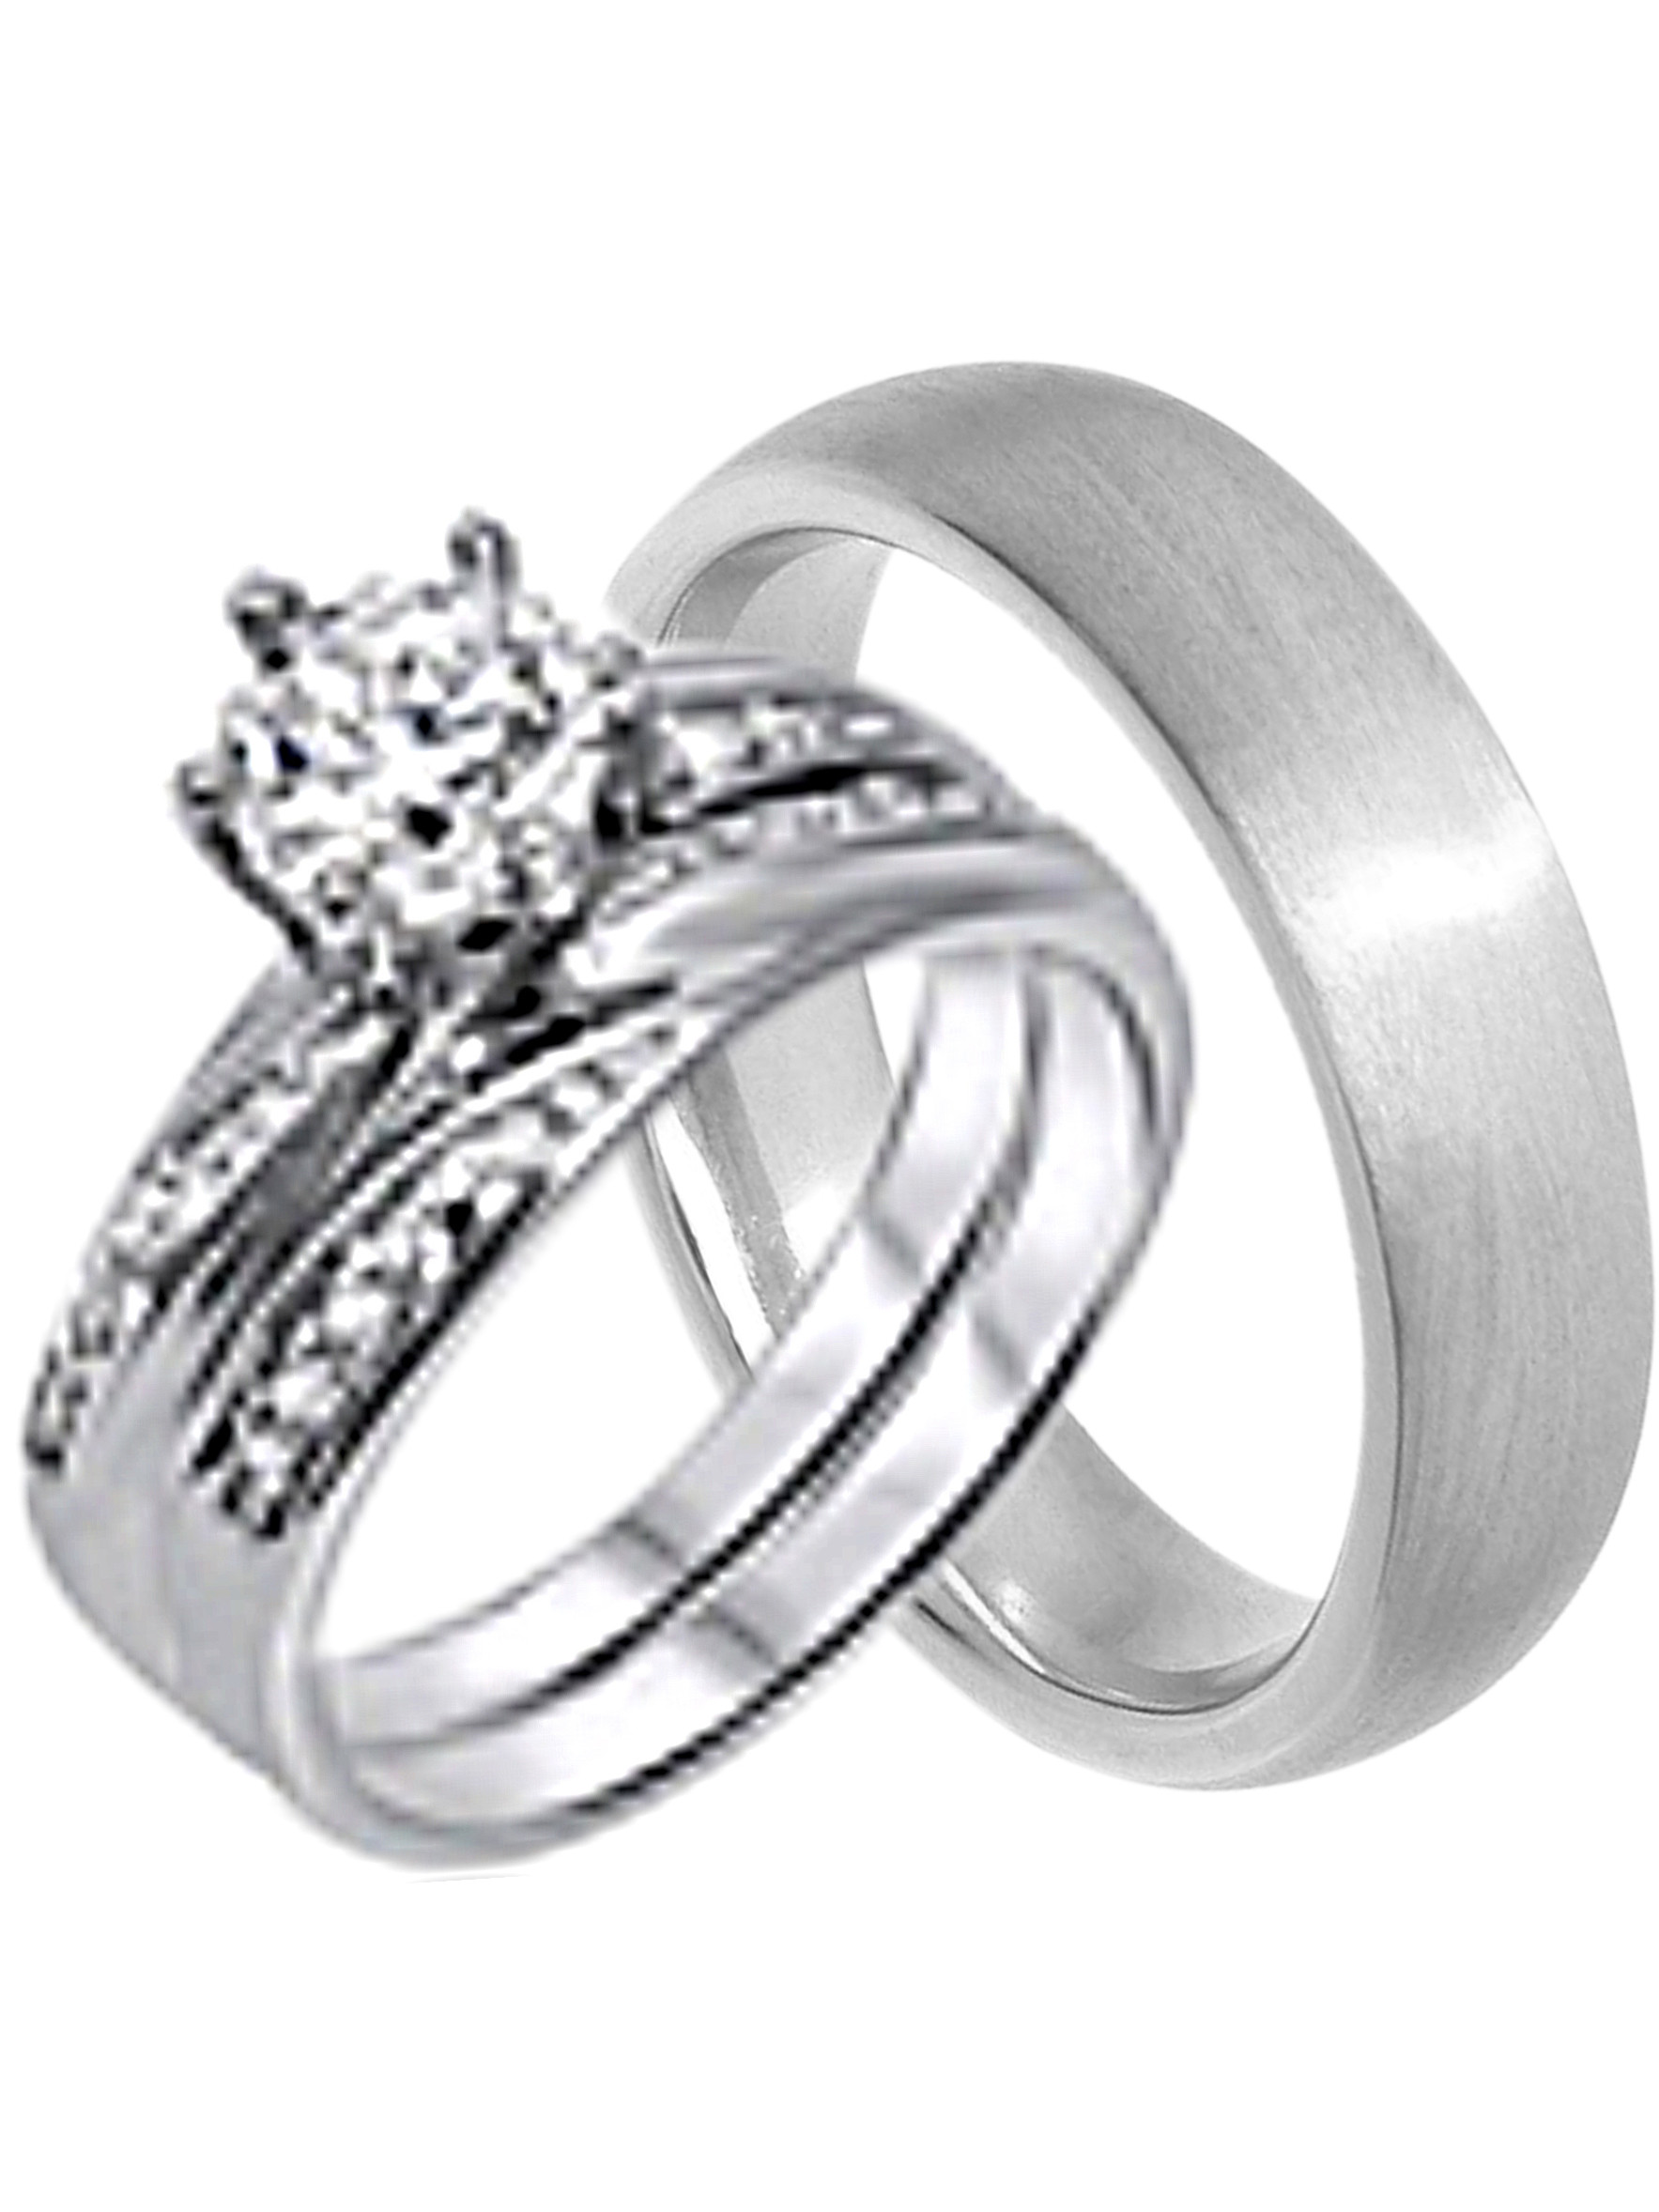 Wedding Ring Sets For Him And Her Cheap
 His and Hers Wedding Ring Set Cheap Wedding Bands for Him